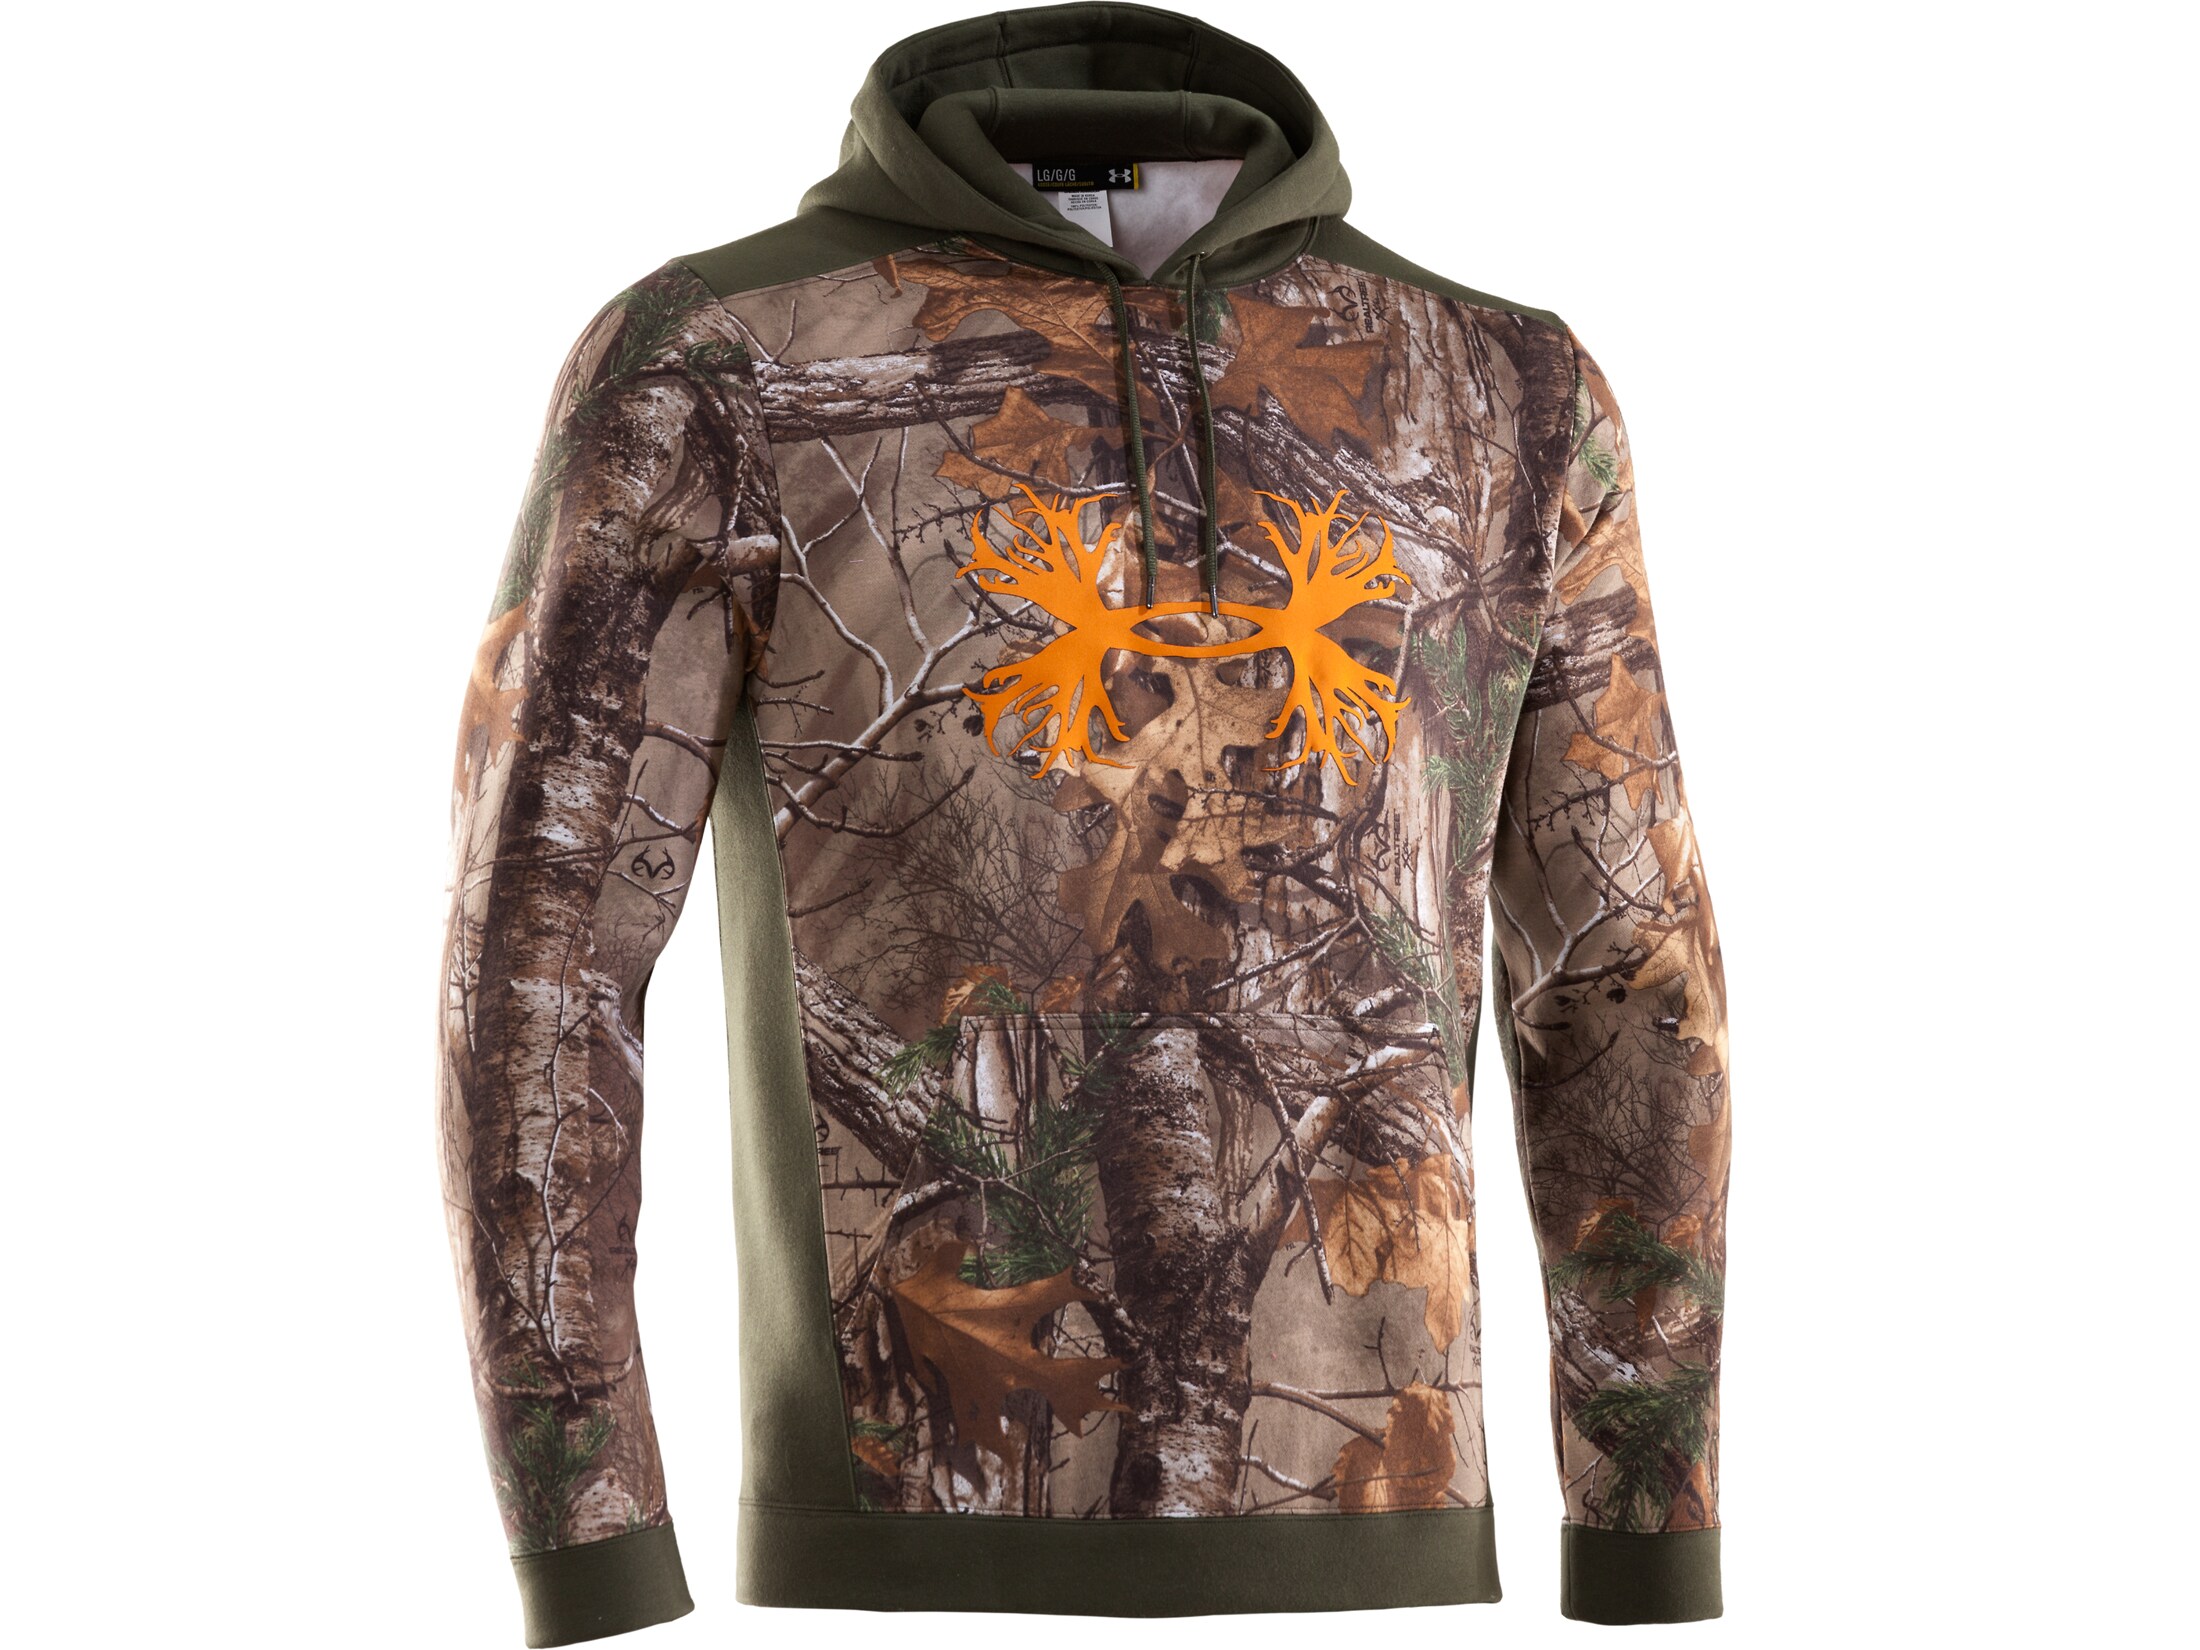 Under Armour Men's Charged Cotton Camo Antler Hooded Sweatshirt Cotton